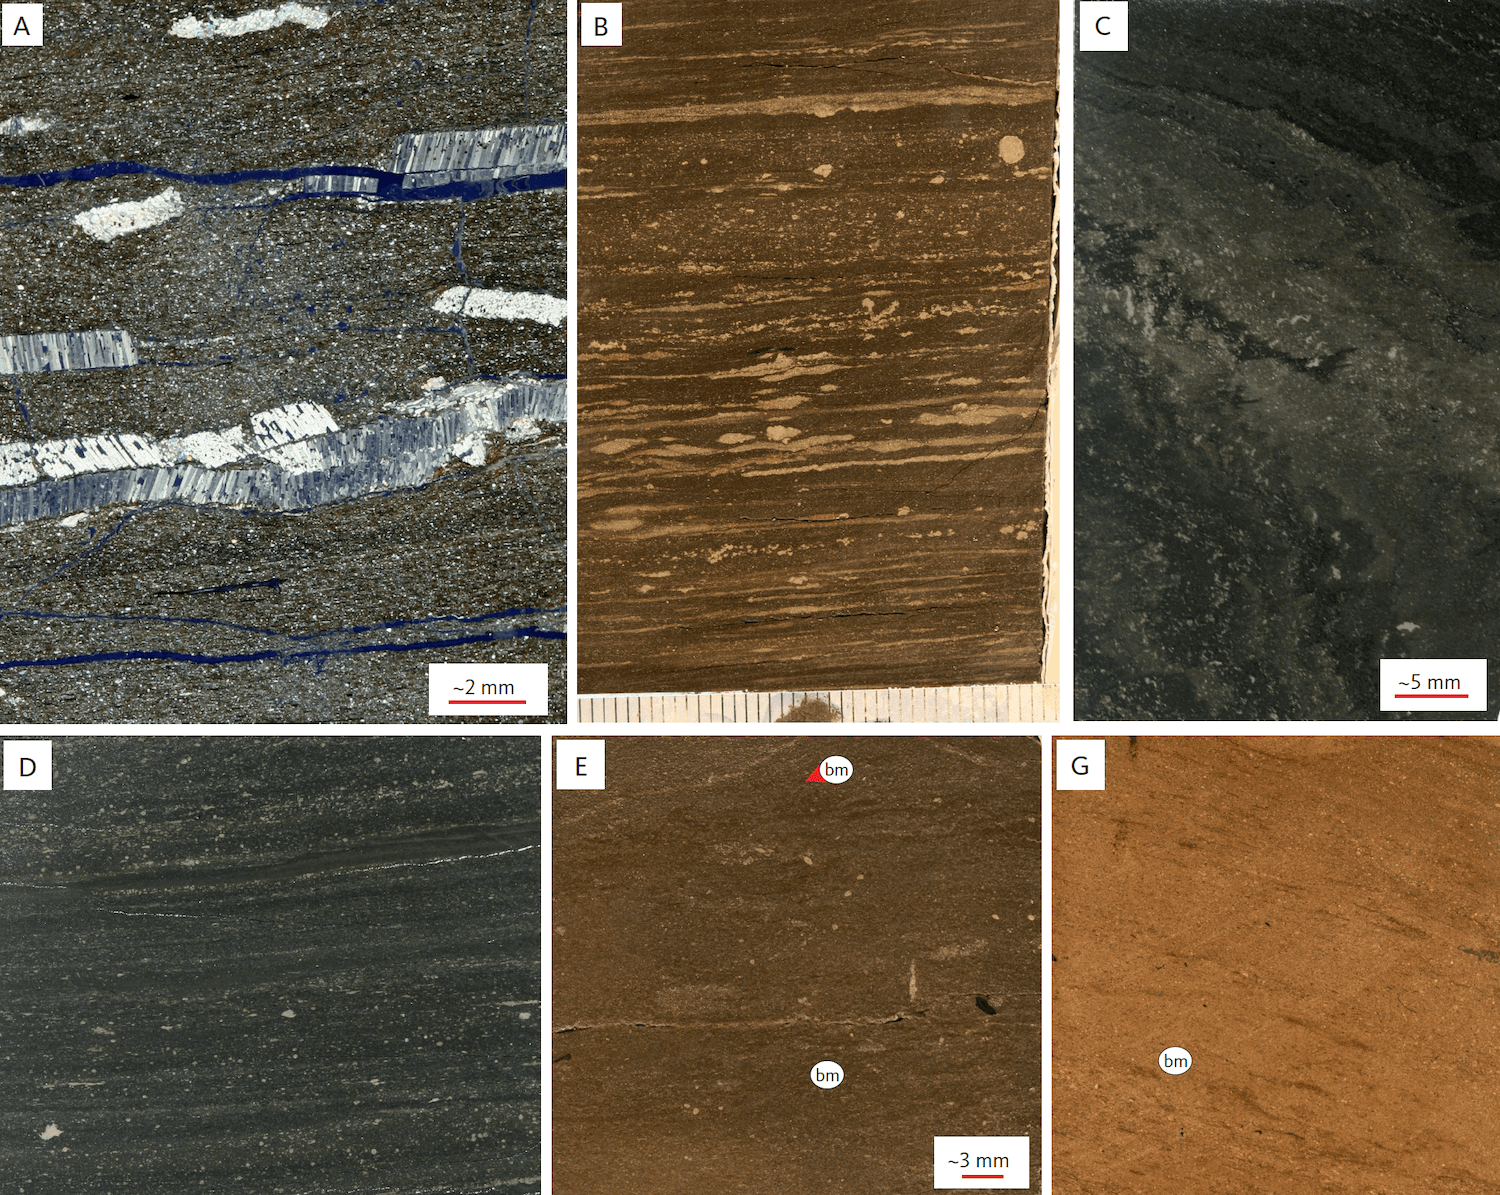 Photos of sediments from Wollaston Forland in Greenland